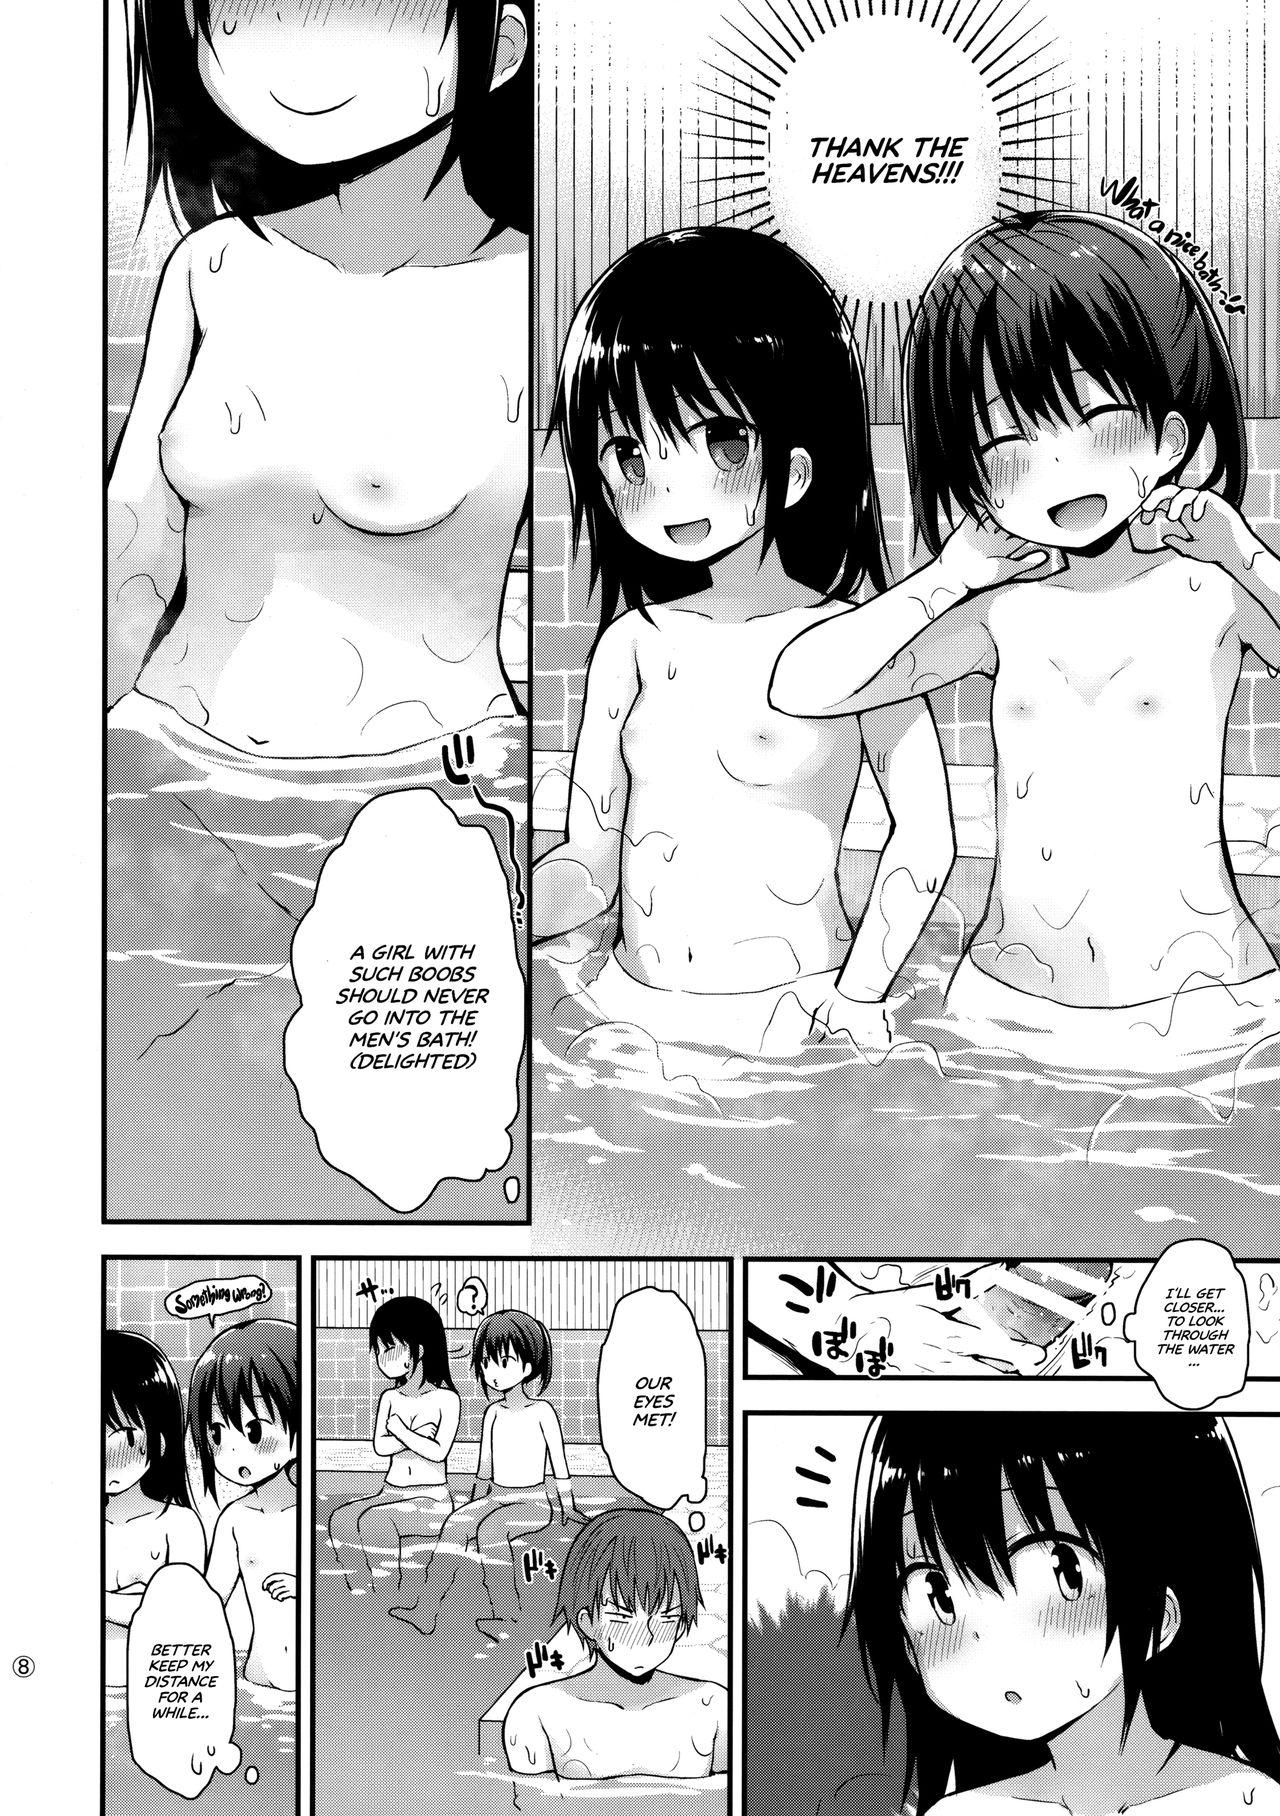 Onnanoko datte Otokoyu ni Hairitai | They may just be little girls, but they still want to enter the men's bath! 6